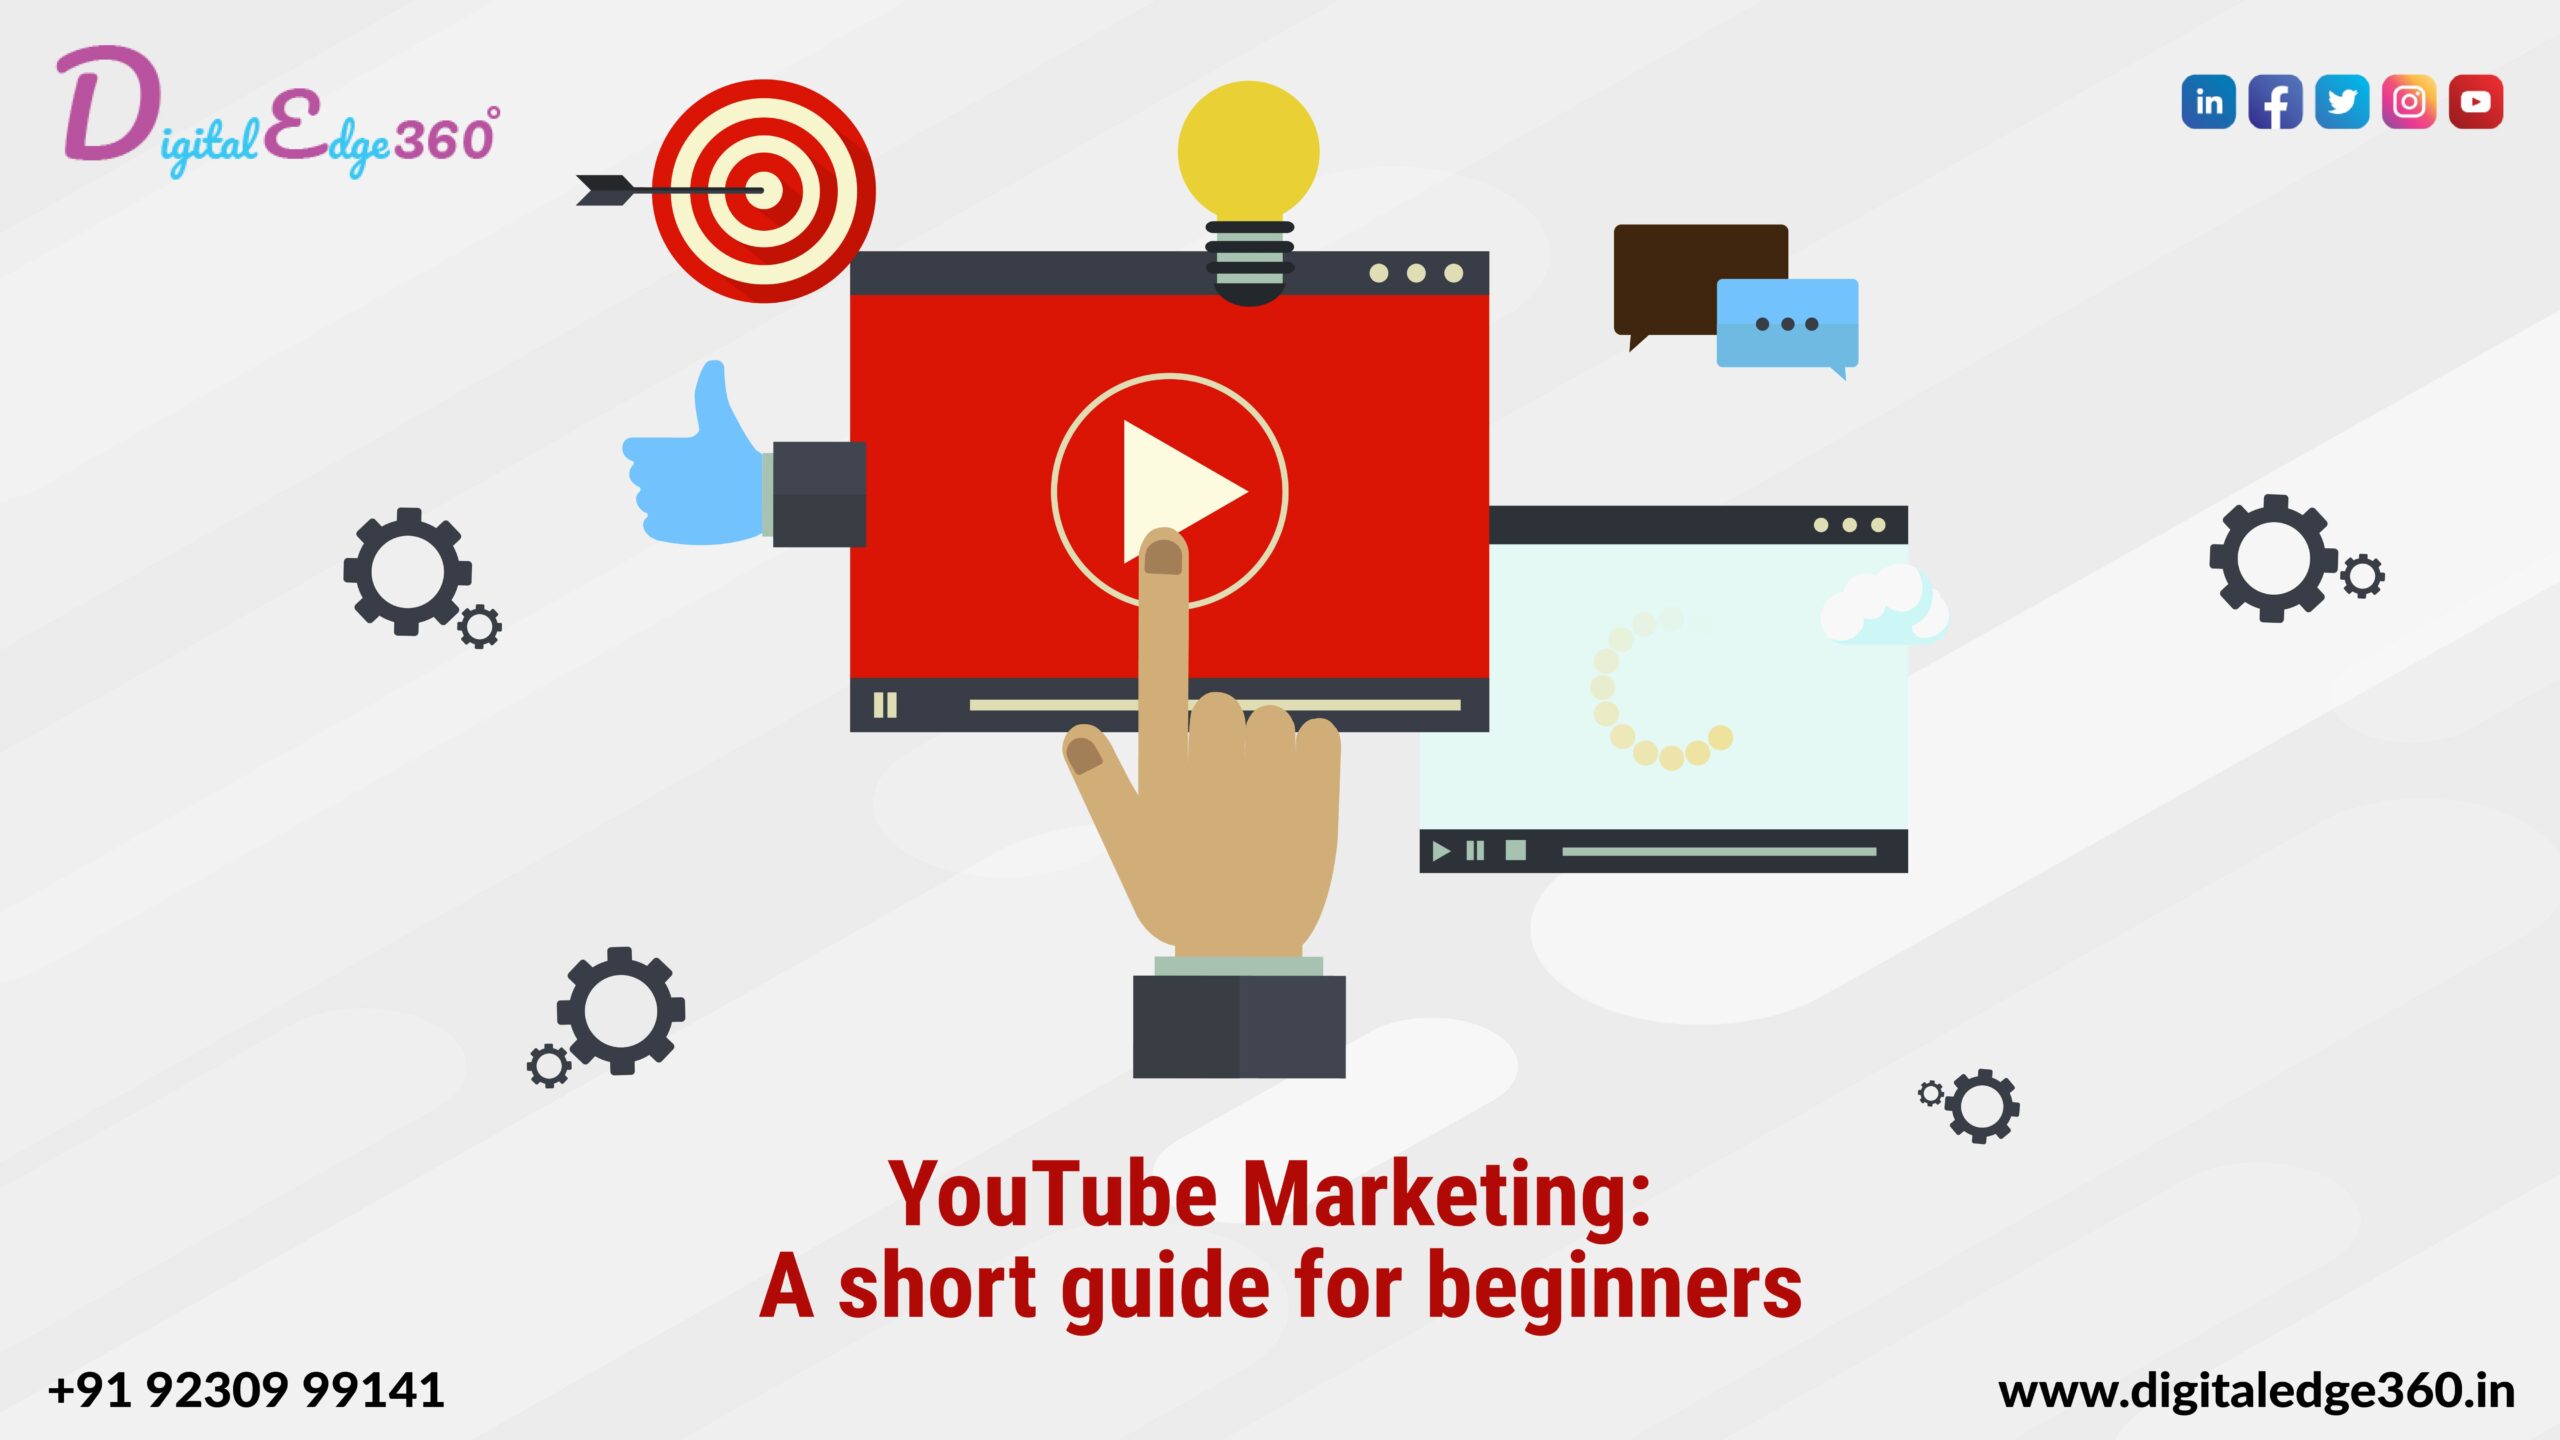 YouTube Marketing: A short guide for beginners